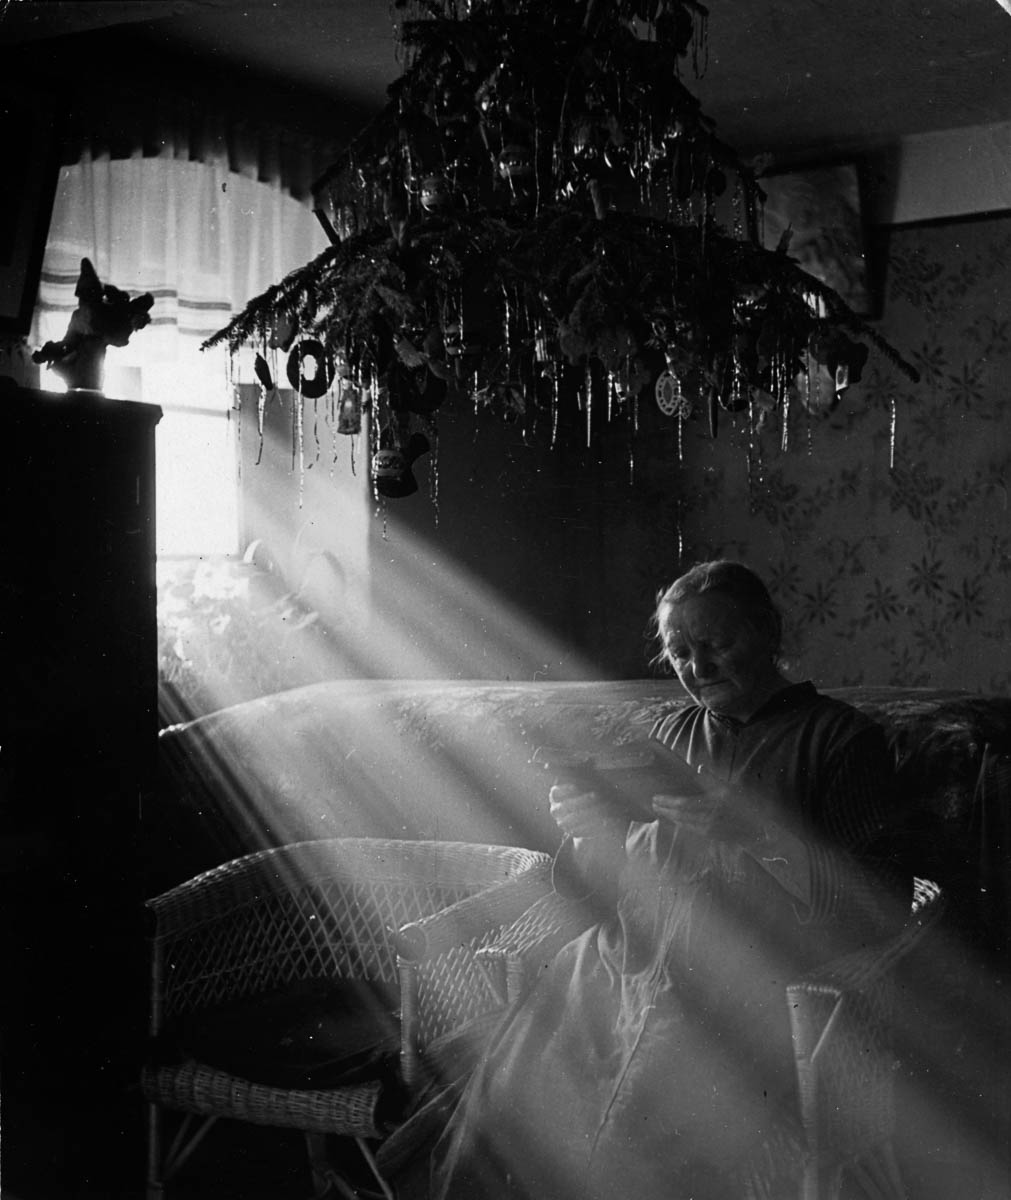 circa 1938: An old Czech woman sits in a shaft of light from a window, overhead hangs a decorated Christmas tree. (Photo by Hulton Archive/Getty Images)